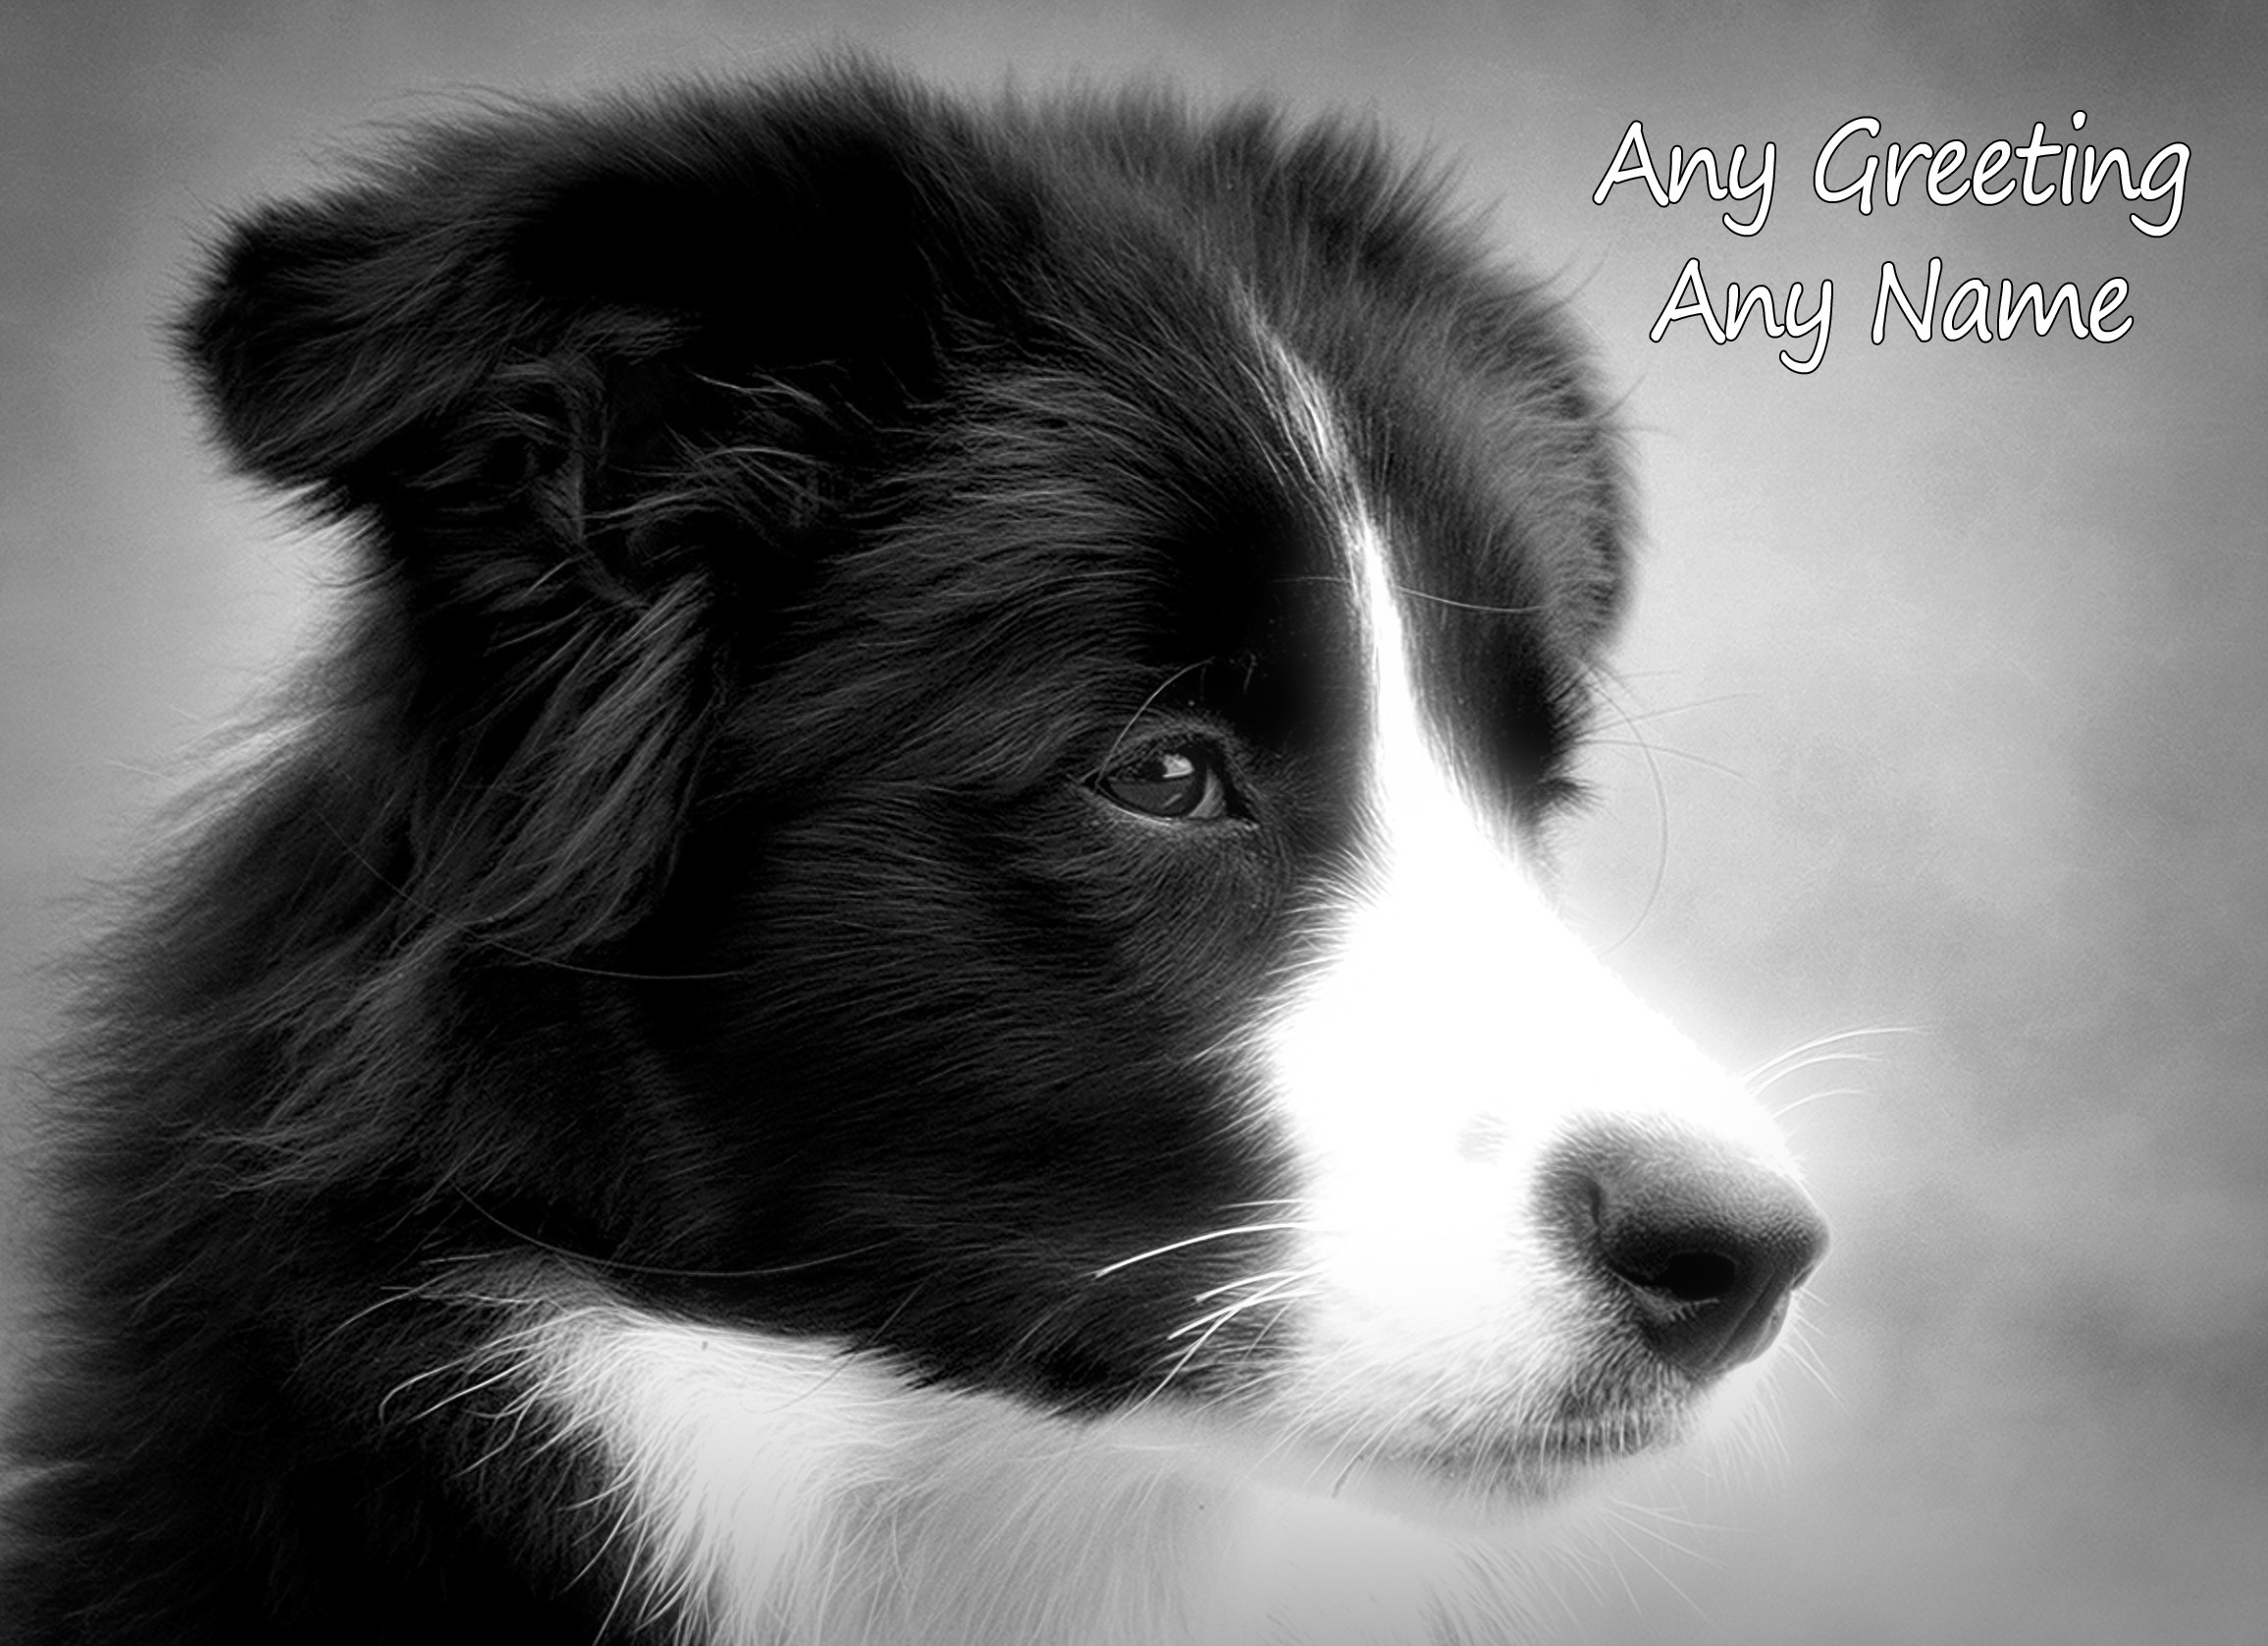 Personalised Border Collie Black and White Greeting Card (Birthday, Christmas, Any Occasion)